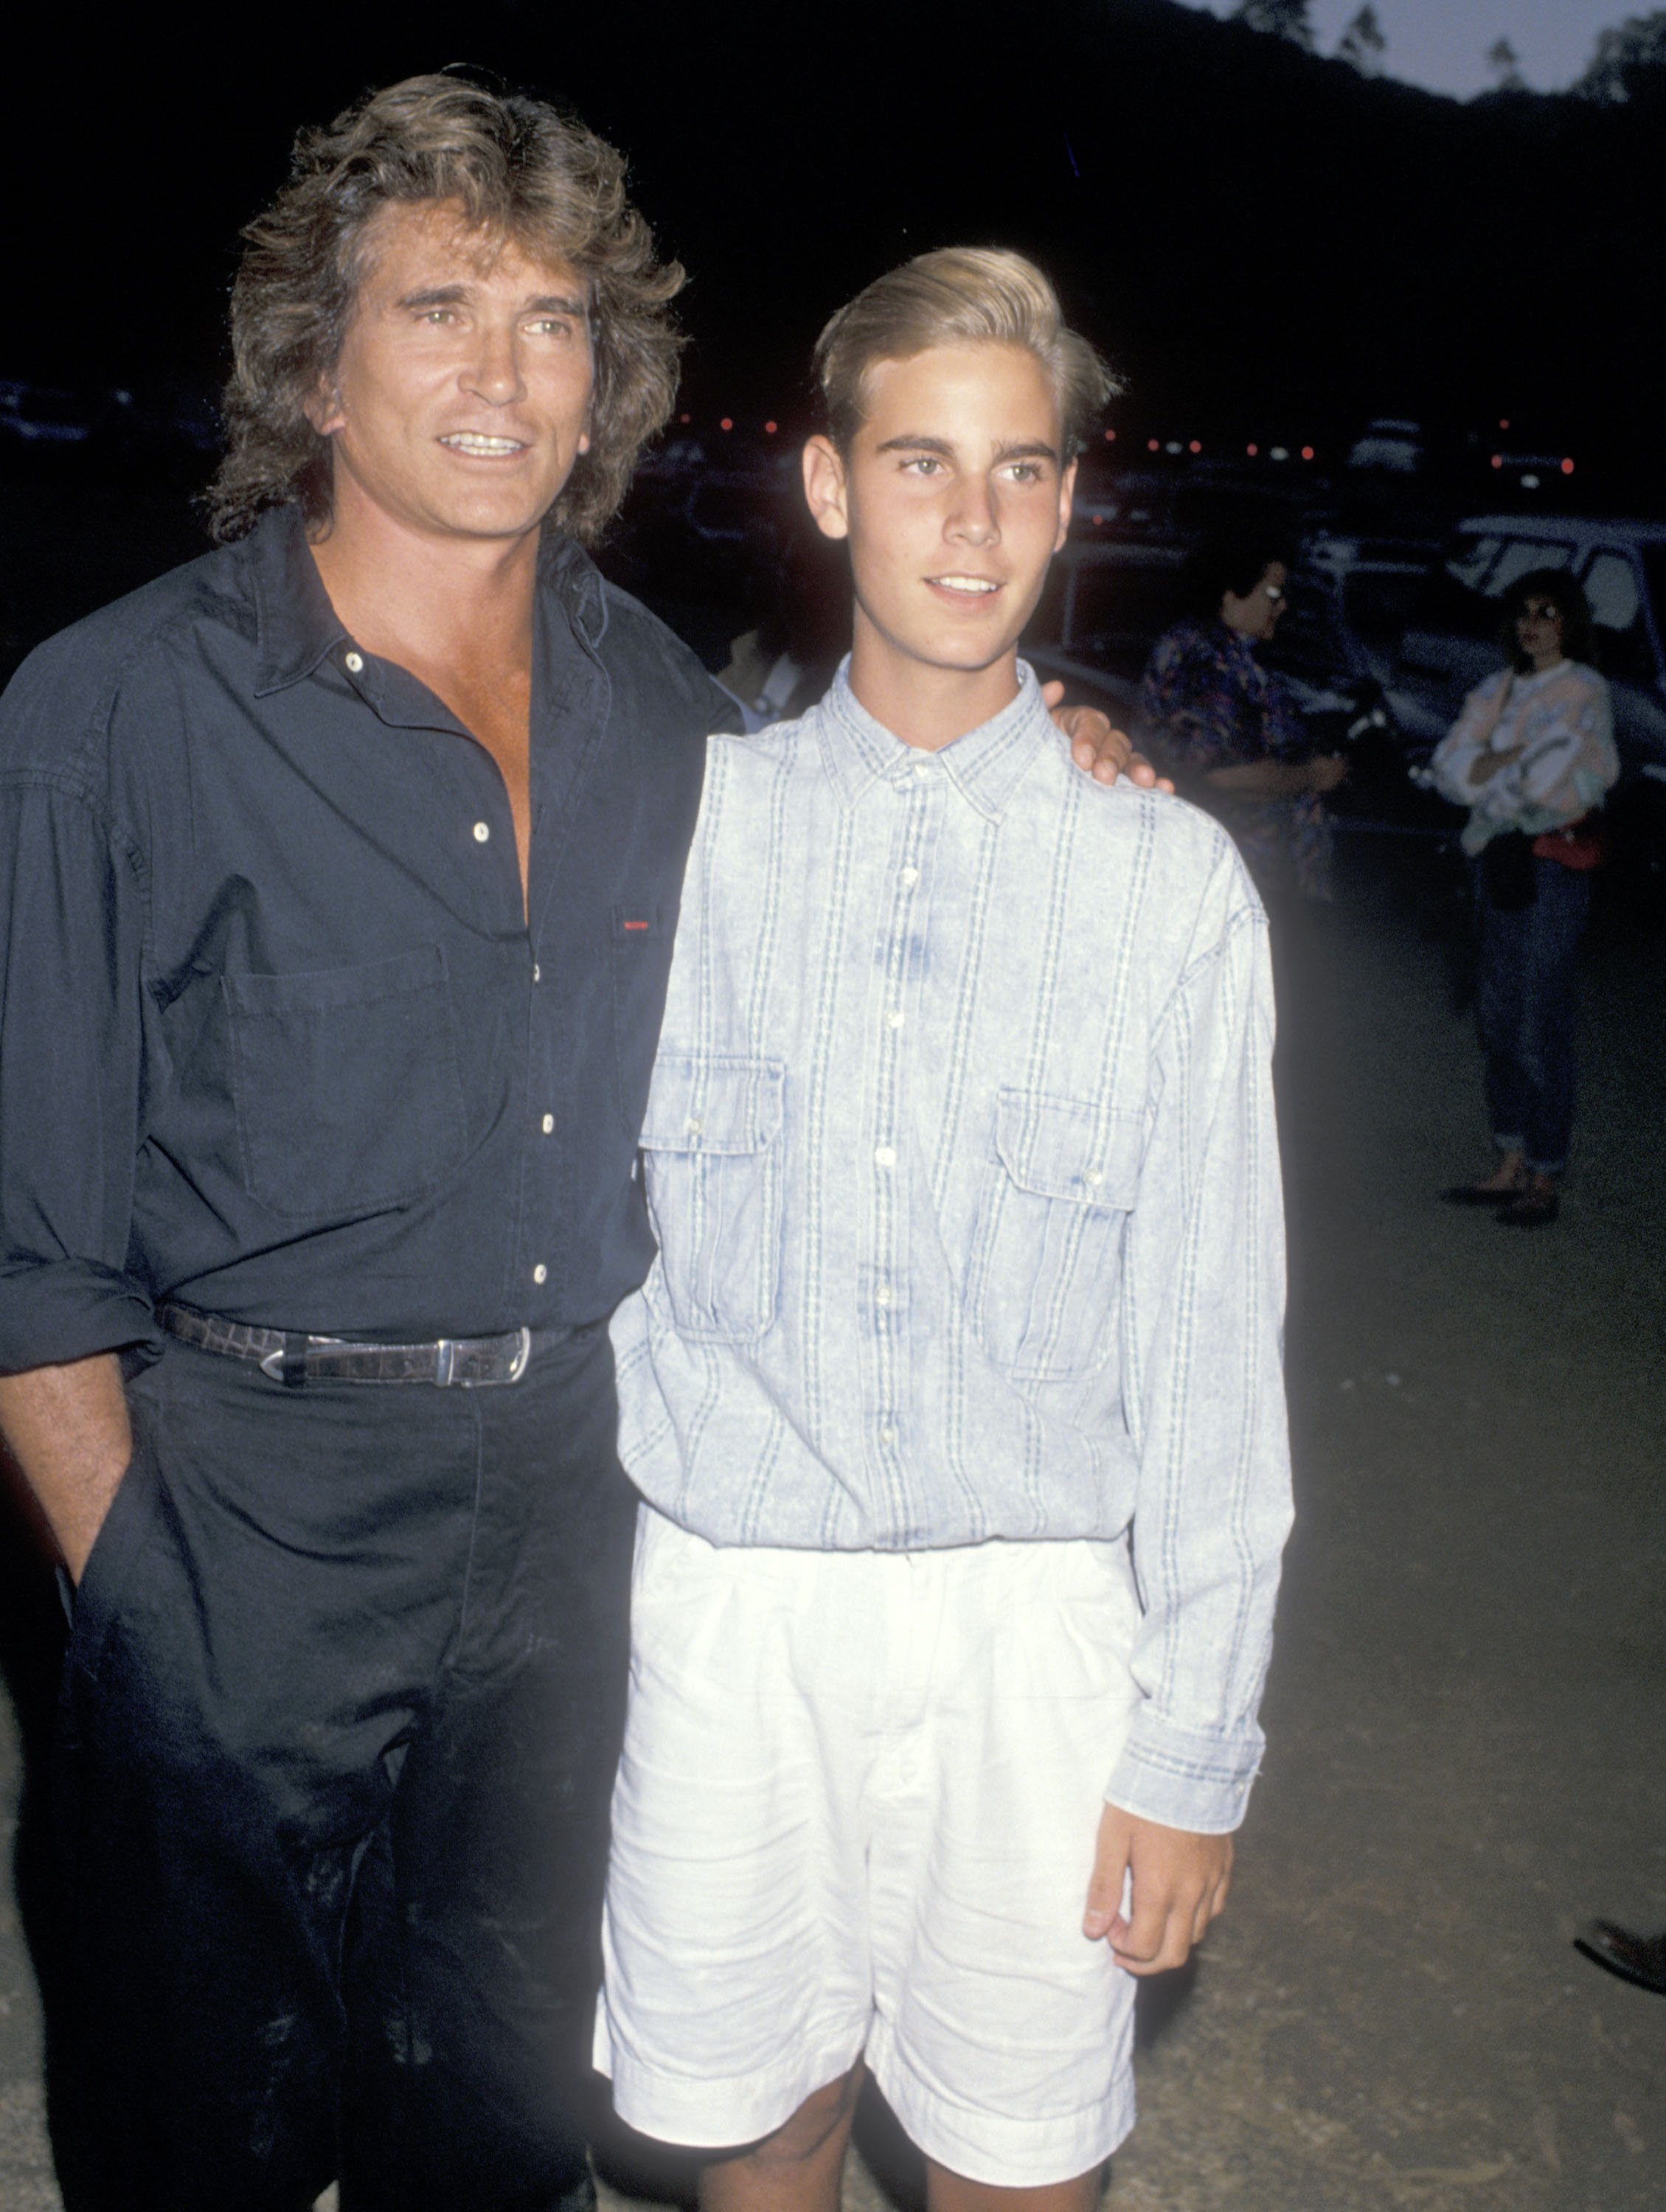 Actor Michael Landon and son Christopher Landon on July 29, 1989, at the Calamigos Ranch in Malibu, California. | Source: Getty Images